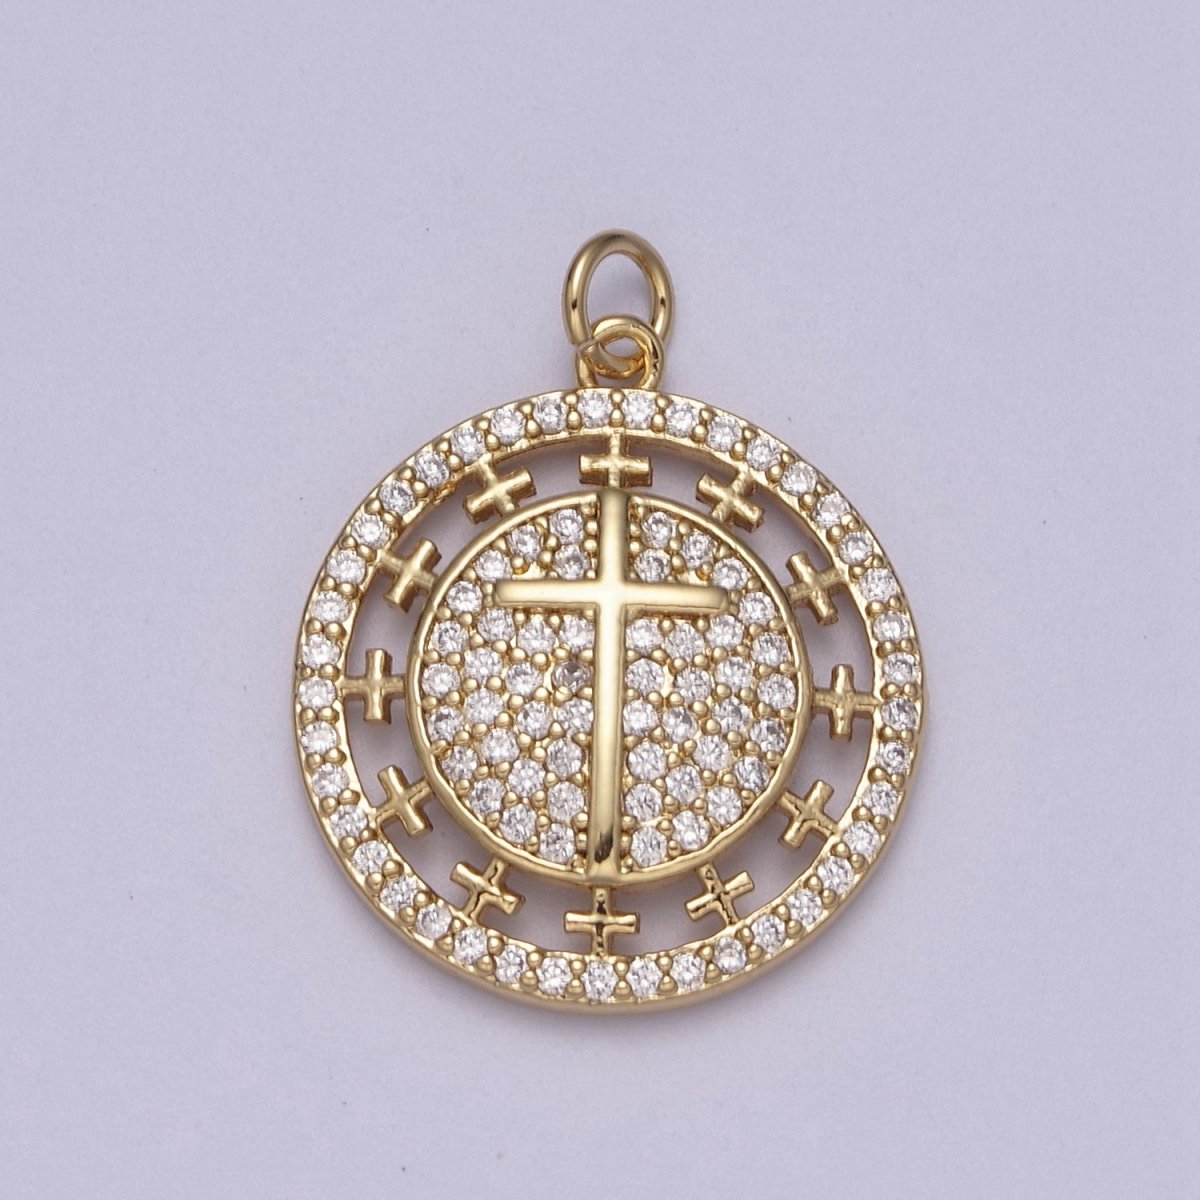 Dainty Cubic Cross Round Coin Medallion Pendant in Gold Catholic Charms Religious Jewelry N-338 - DLUXCA